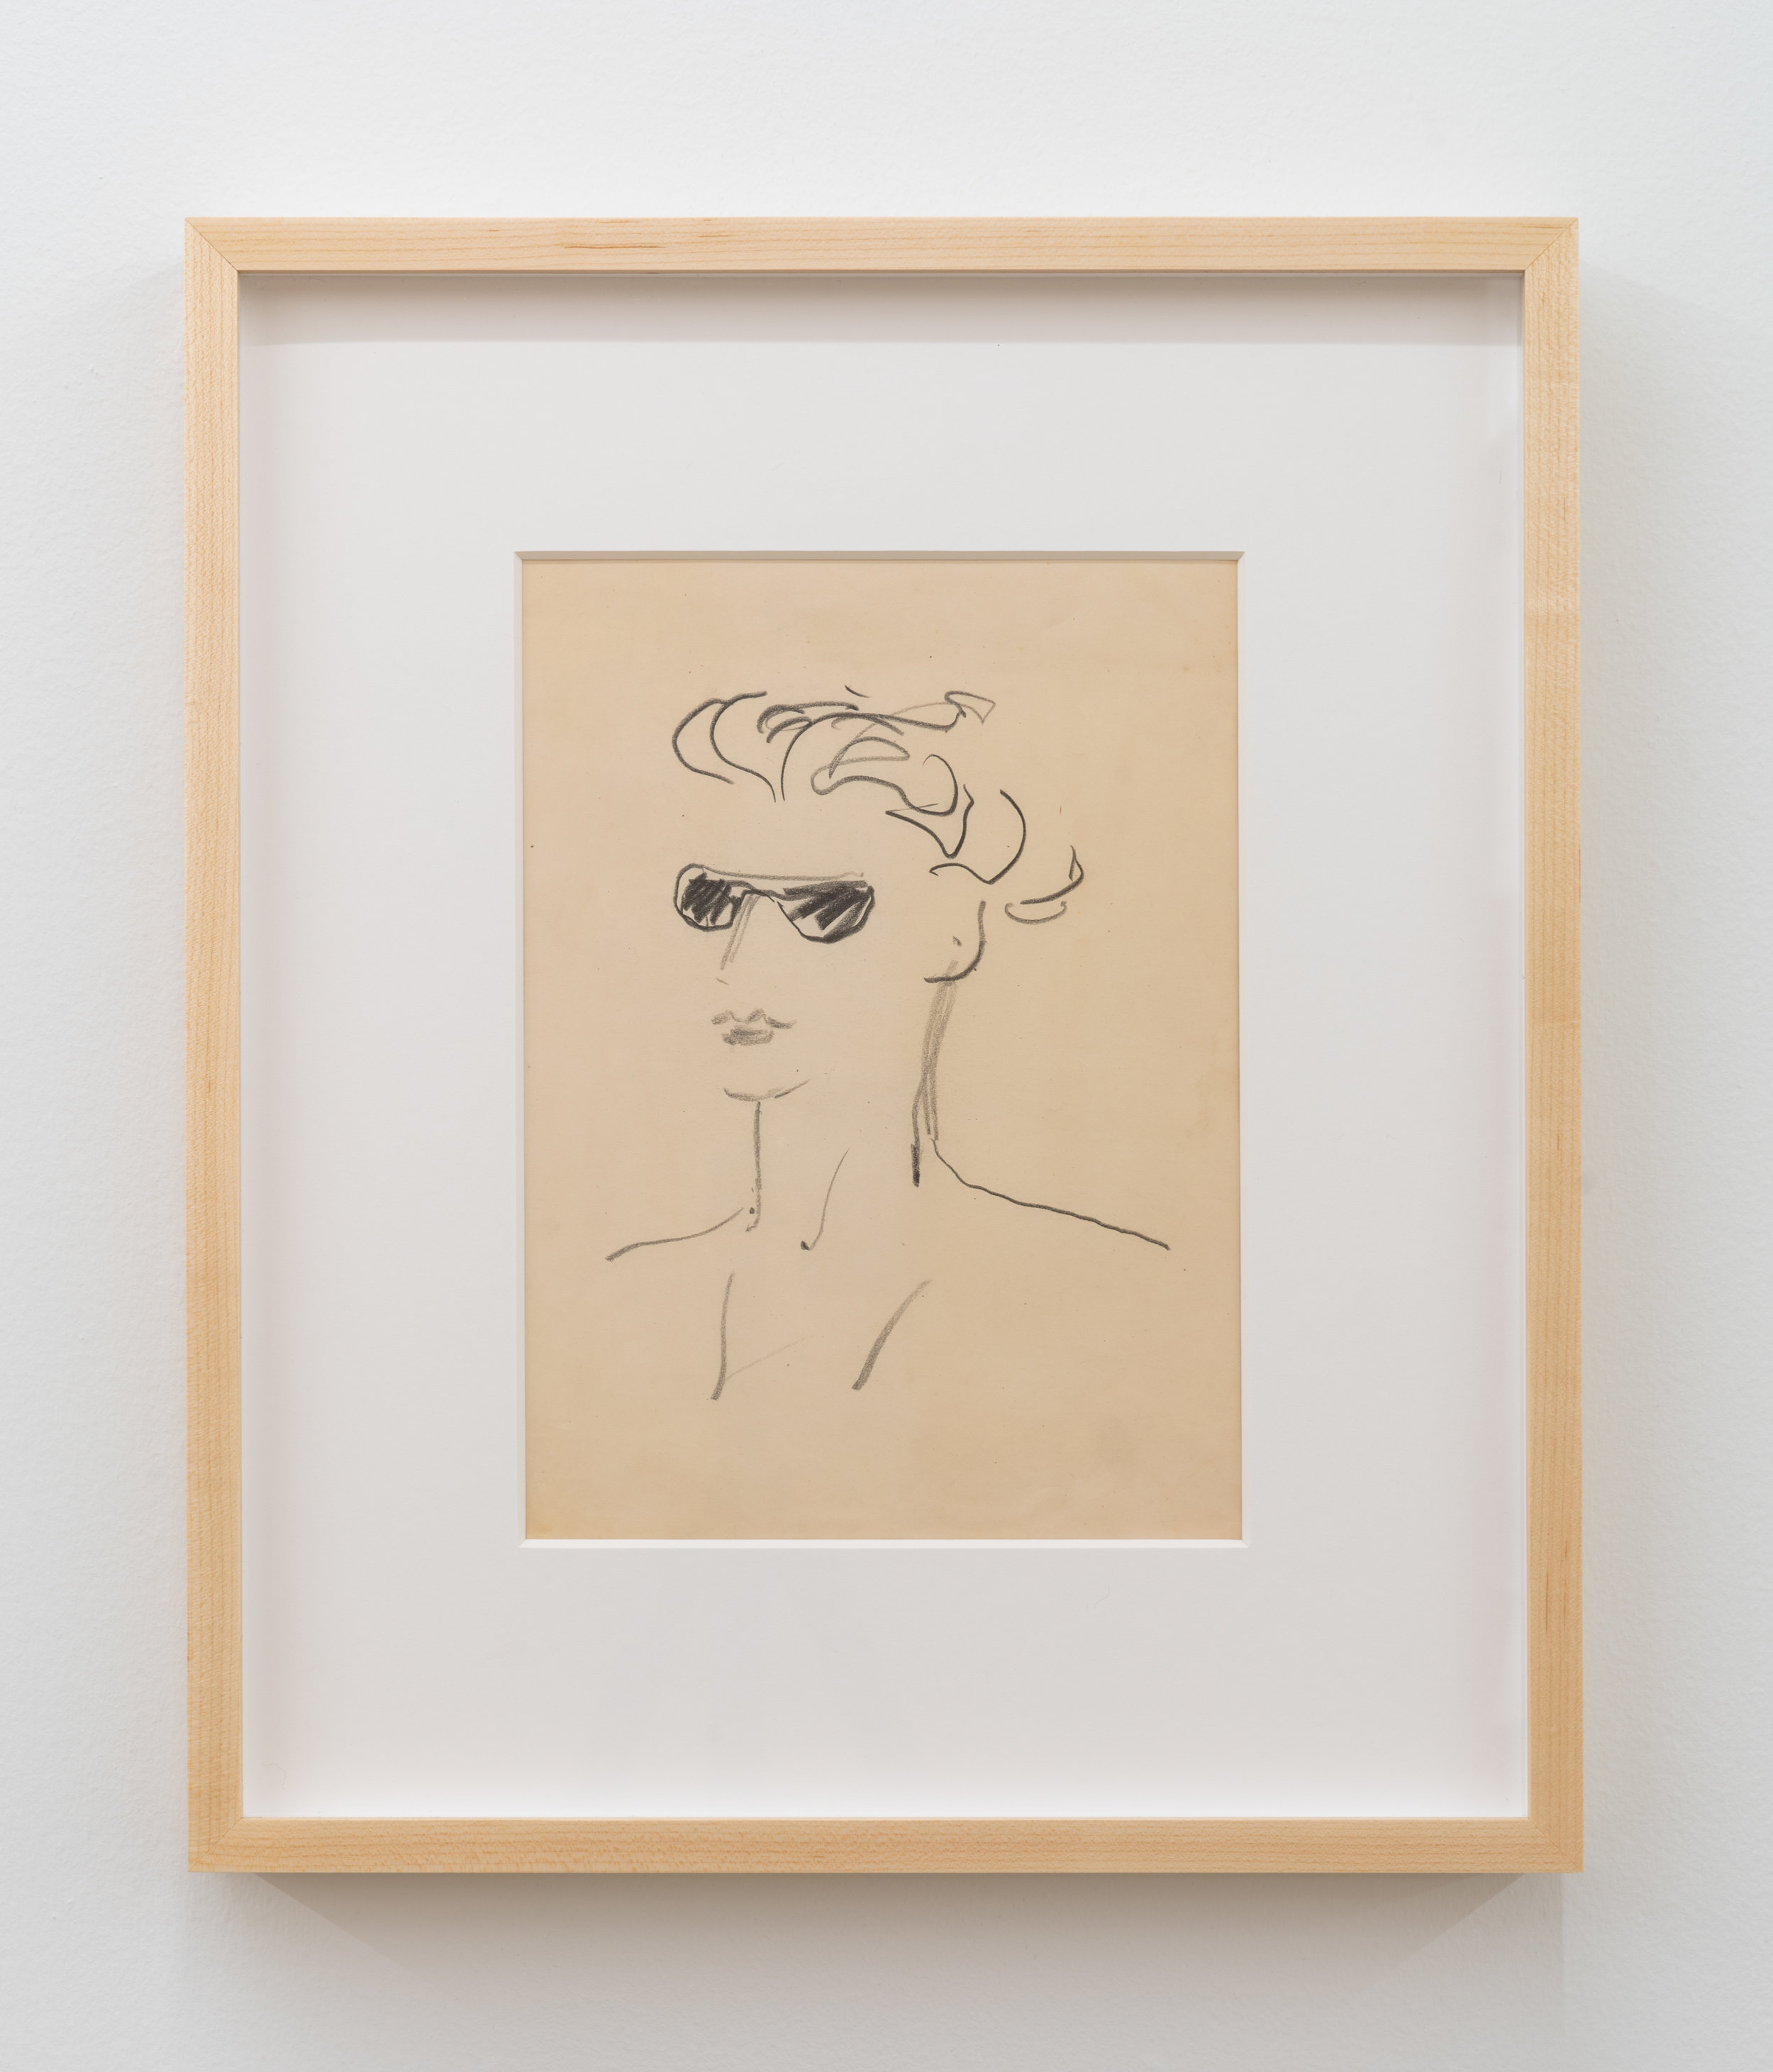  Paula Brunner Abelow,  Figure wearing Sunglasses,” circa 1940s, Pencil on paper, 12 x 9 inches 